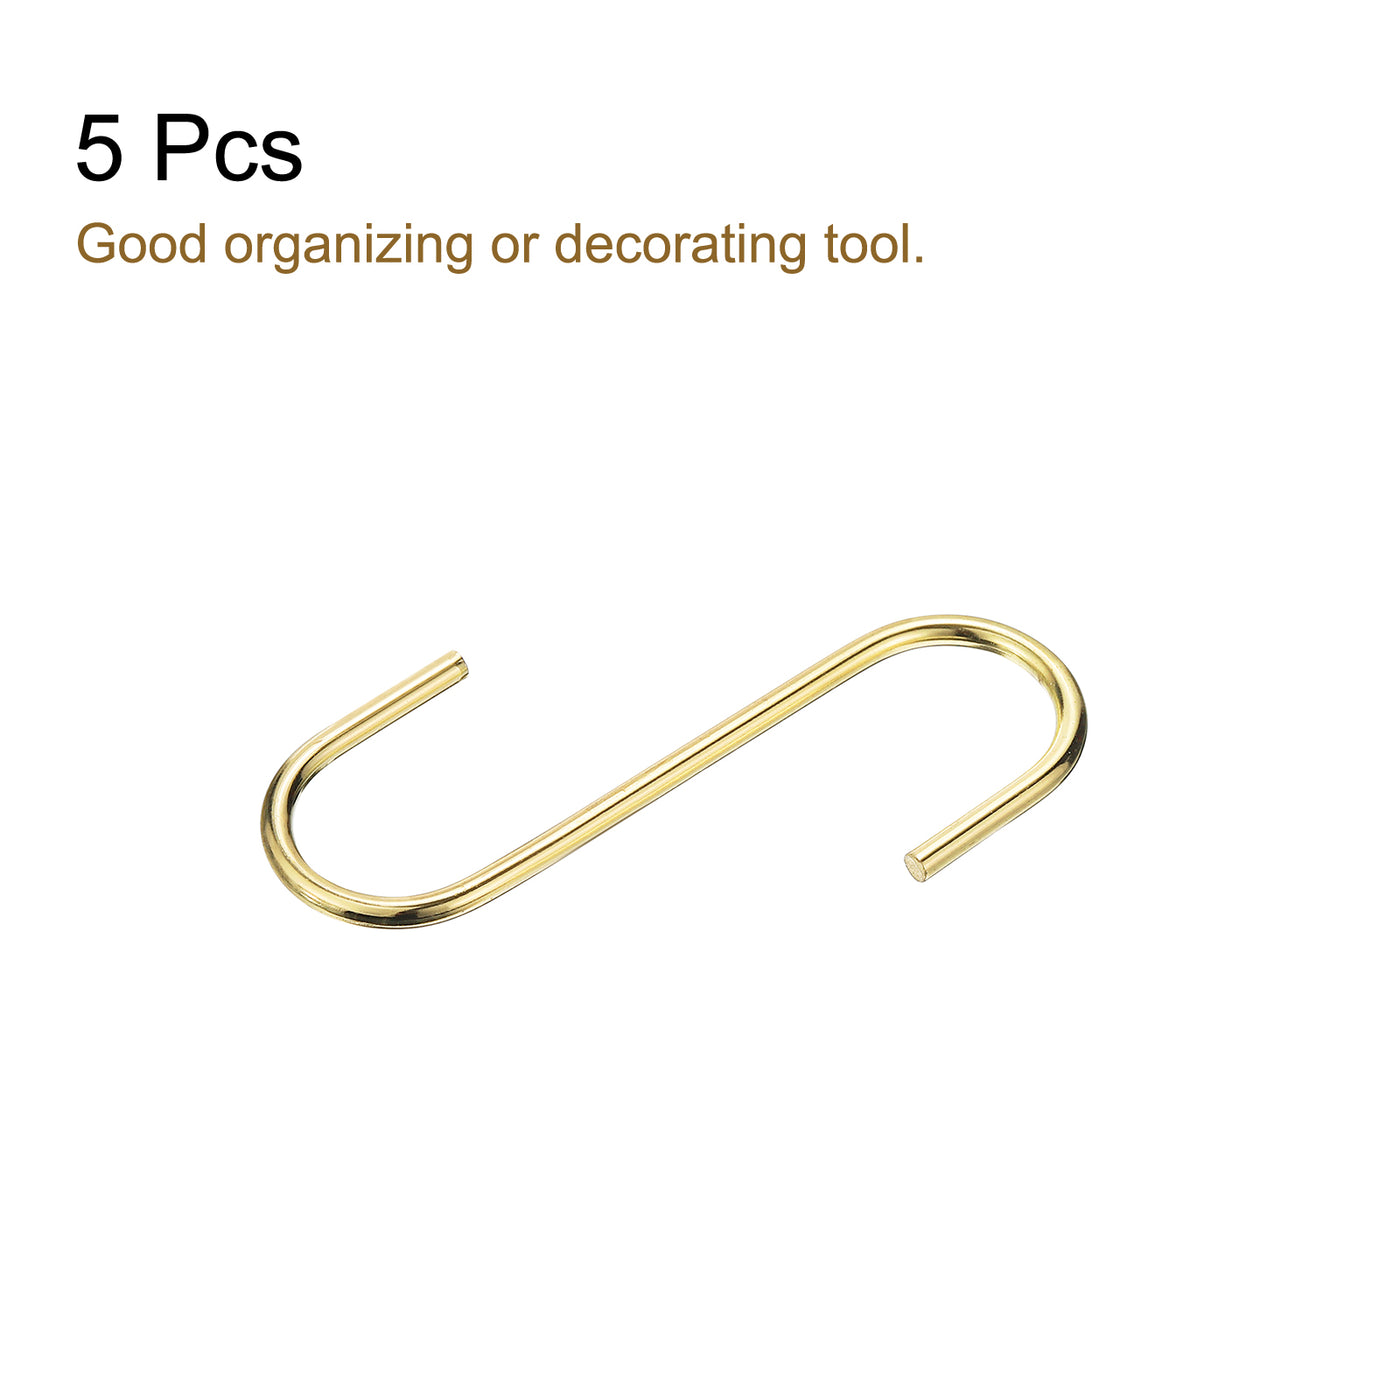 uxcell Uxcell S Hanging Hooks, 5inch(120mm) Extra Long Steel Hanger, Indoor Outdoor Uses for Garden, Bathroom, Closet, Workshop, Kitchen, Gold Tone, 5Pcs